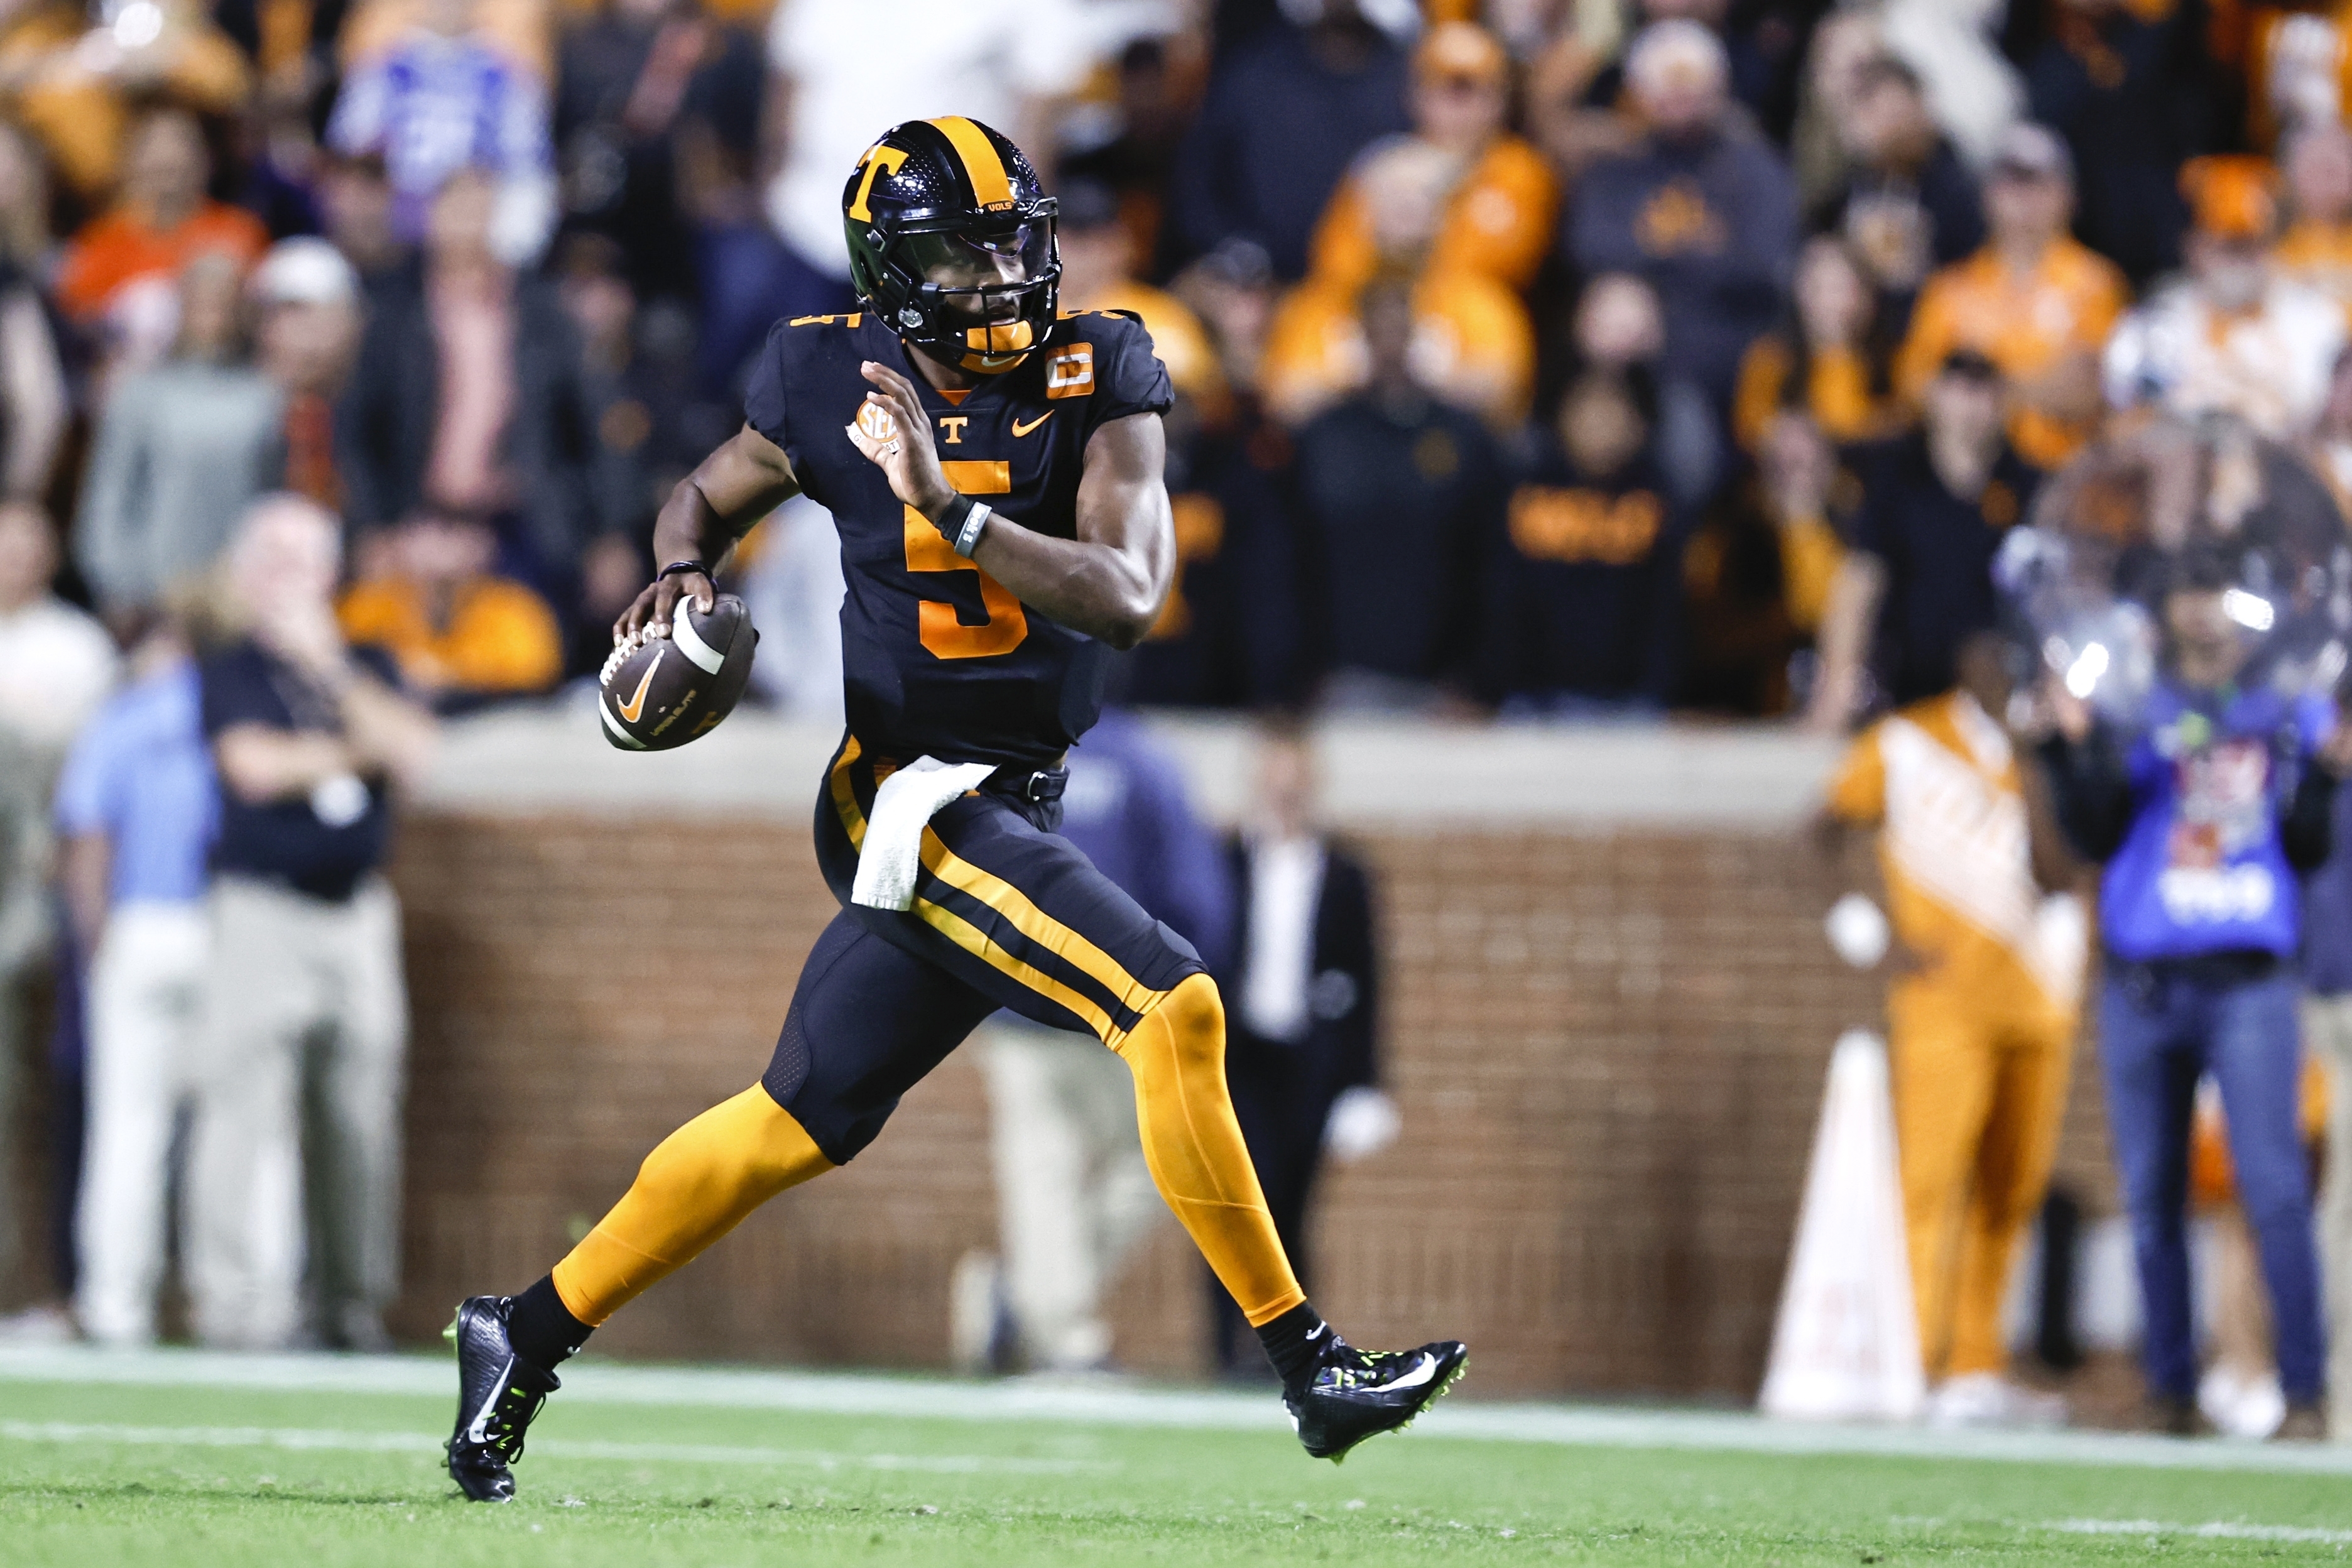 College football betting: Tennessee's Hendon Hooker is now the Heisman favorite